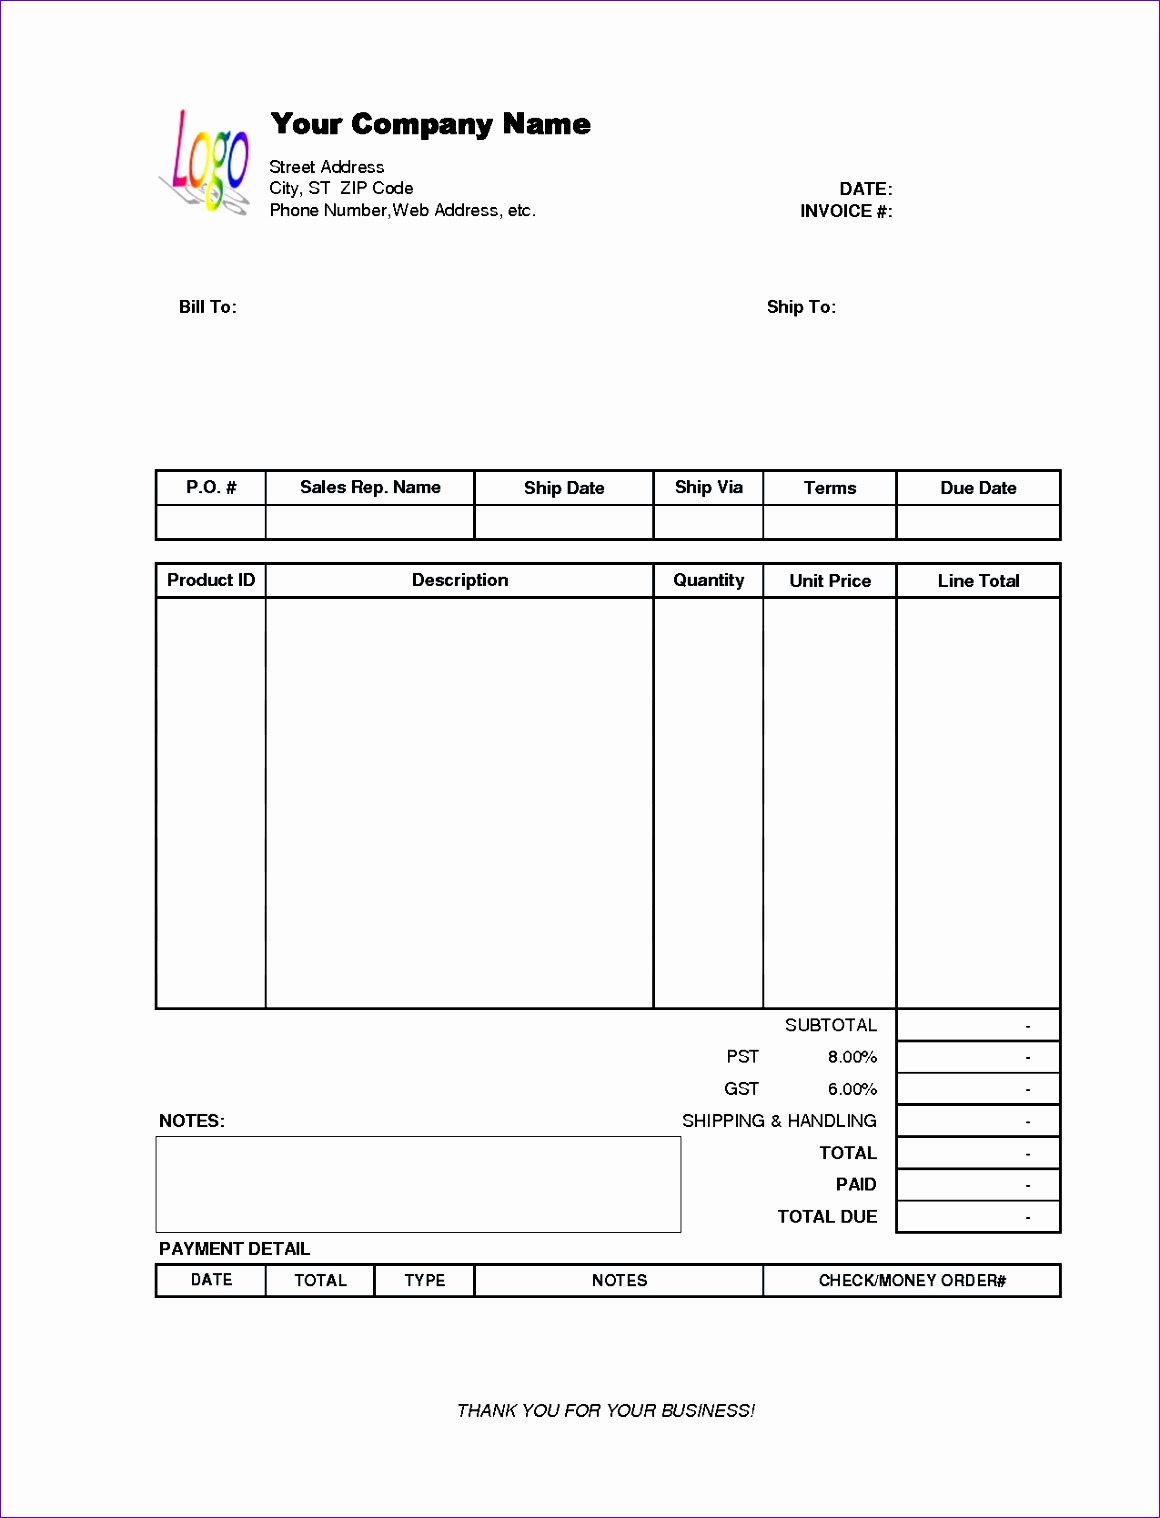 paid invoice receipt template 11601518